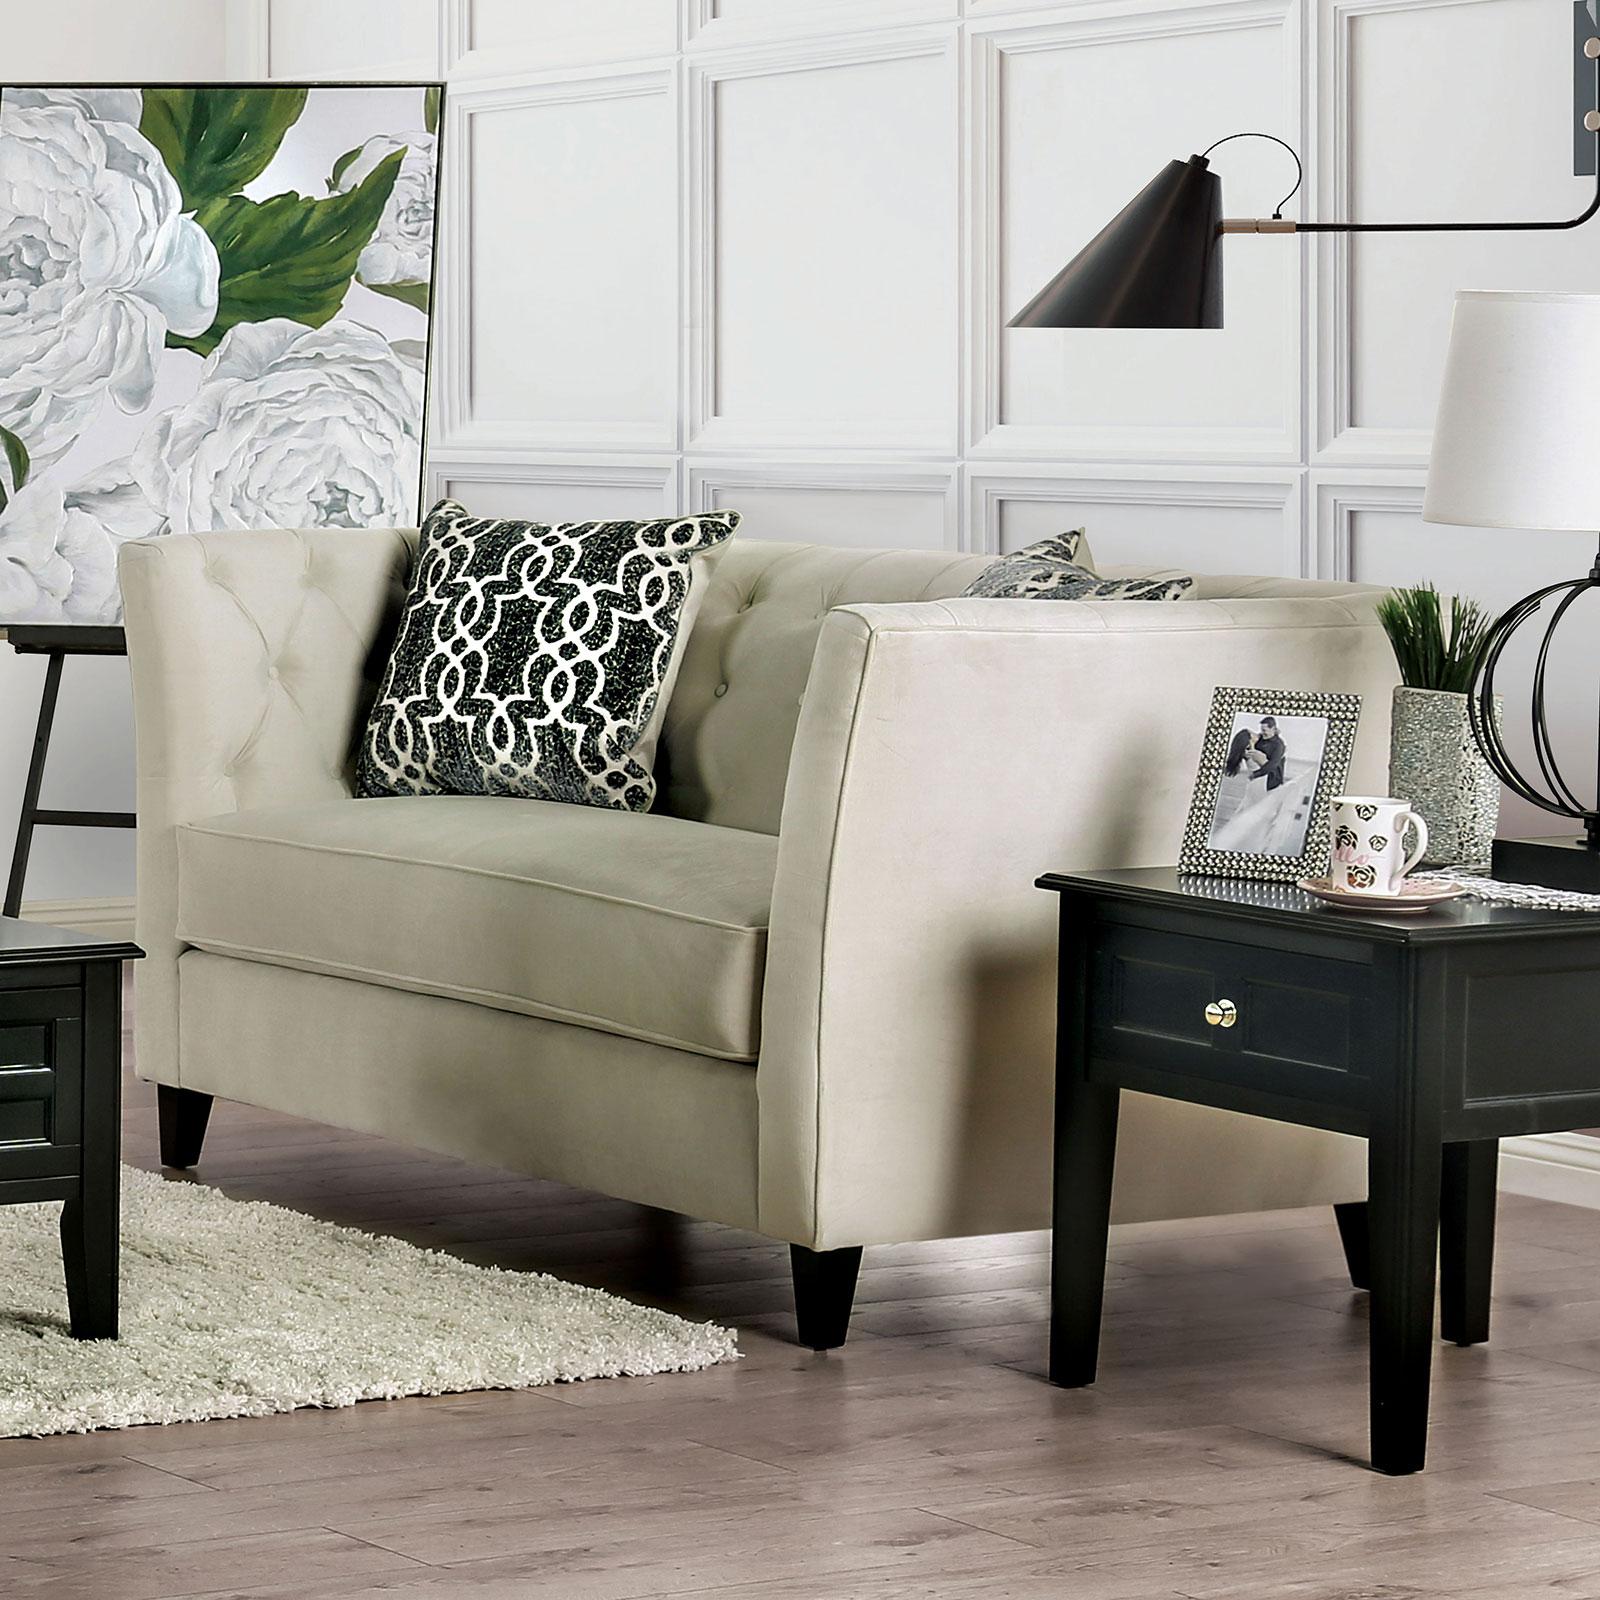 Transitional Loveseat MONAGHAN SM2665-LV SM2665-LV in Beige Fabric